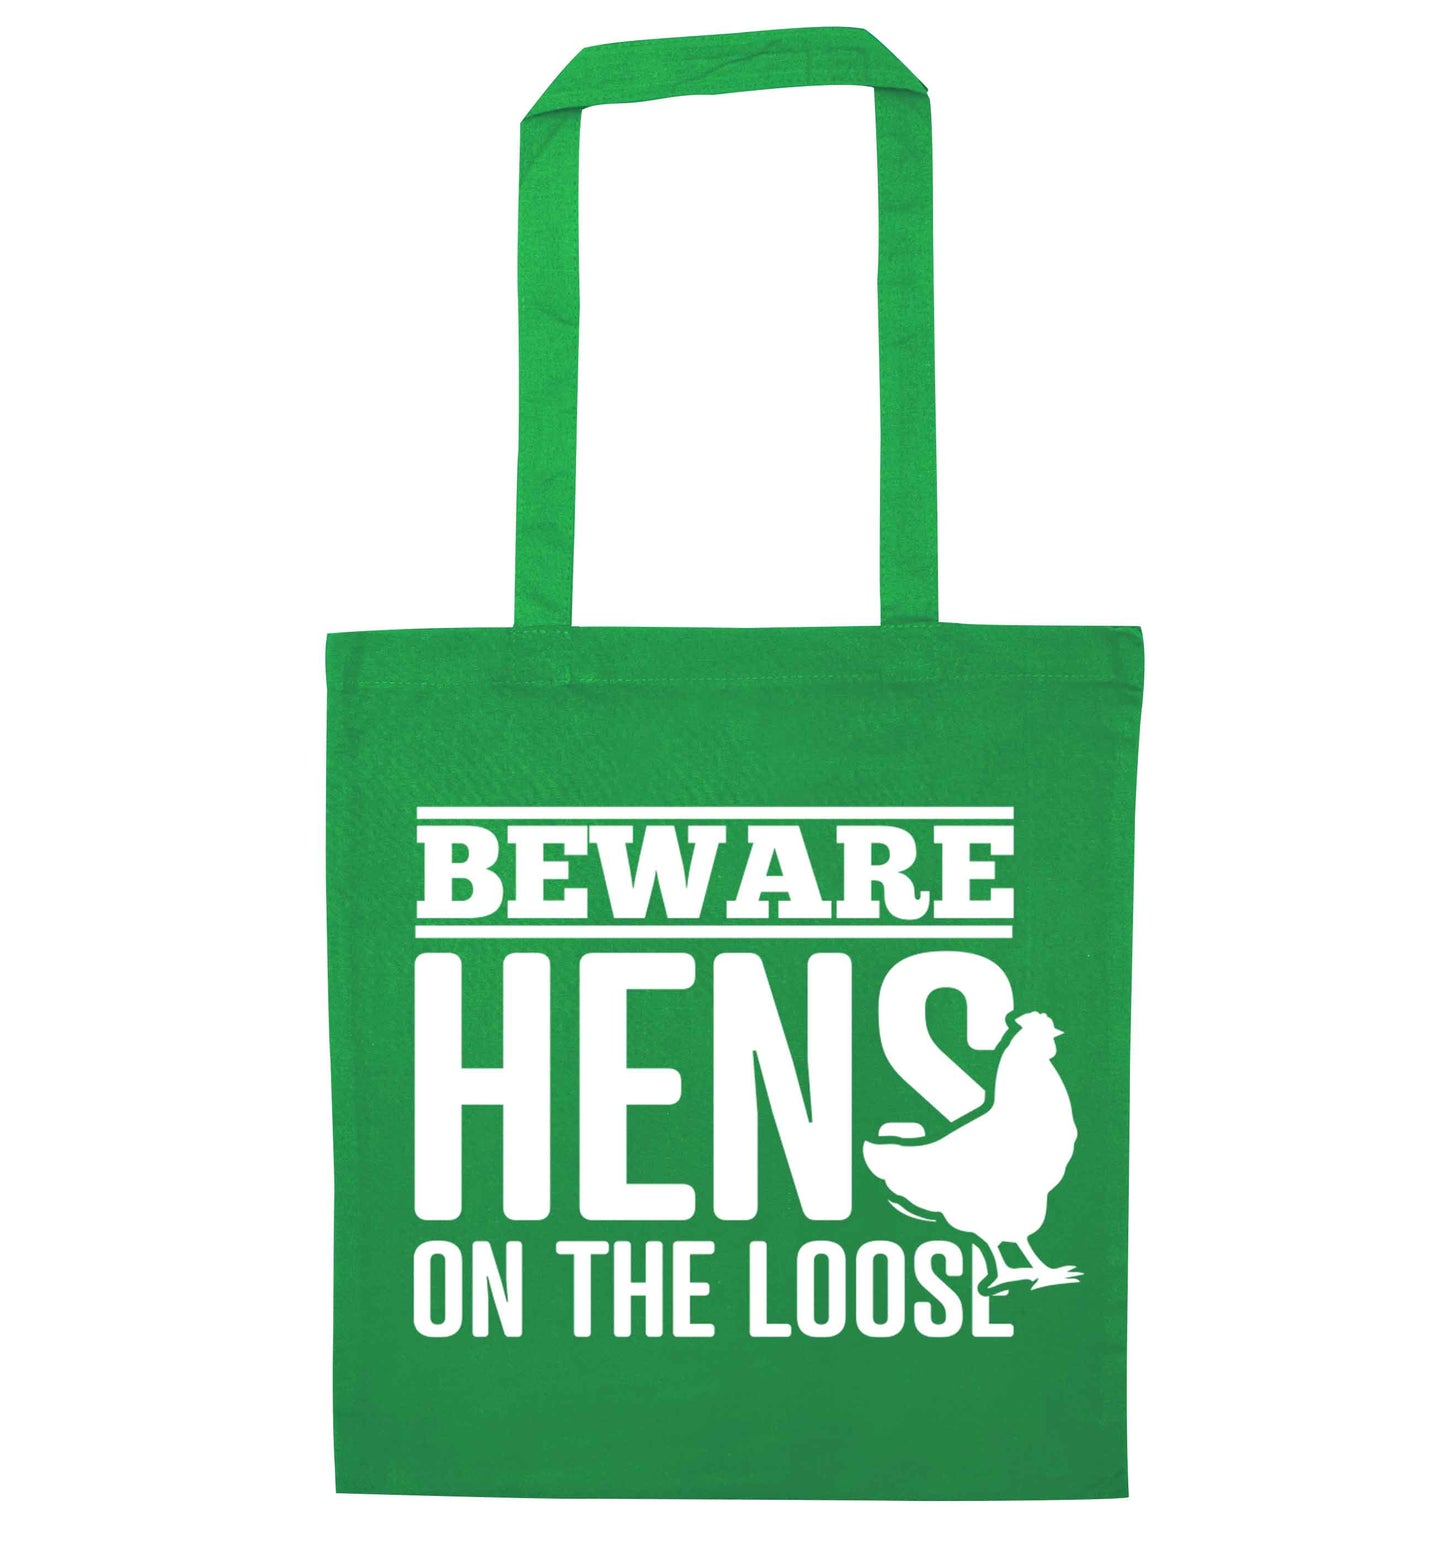 Beware hens on the loose green tote bag